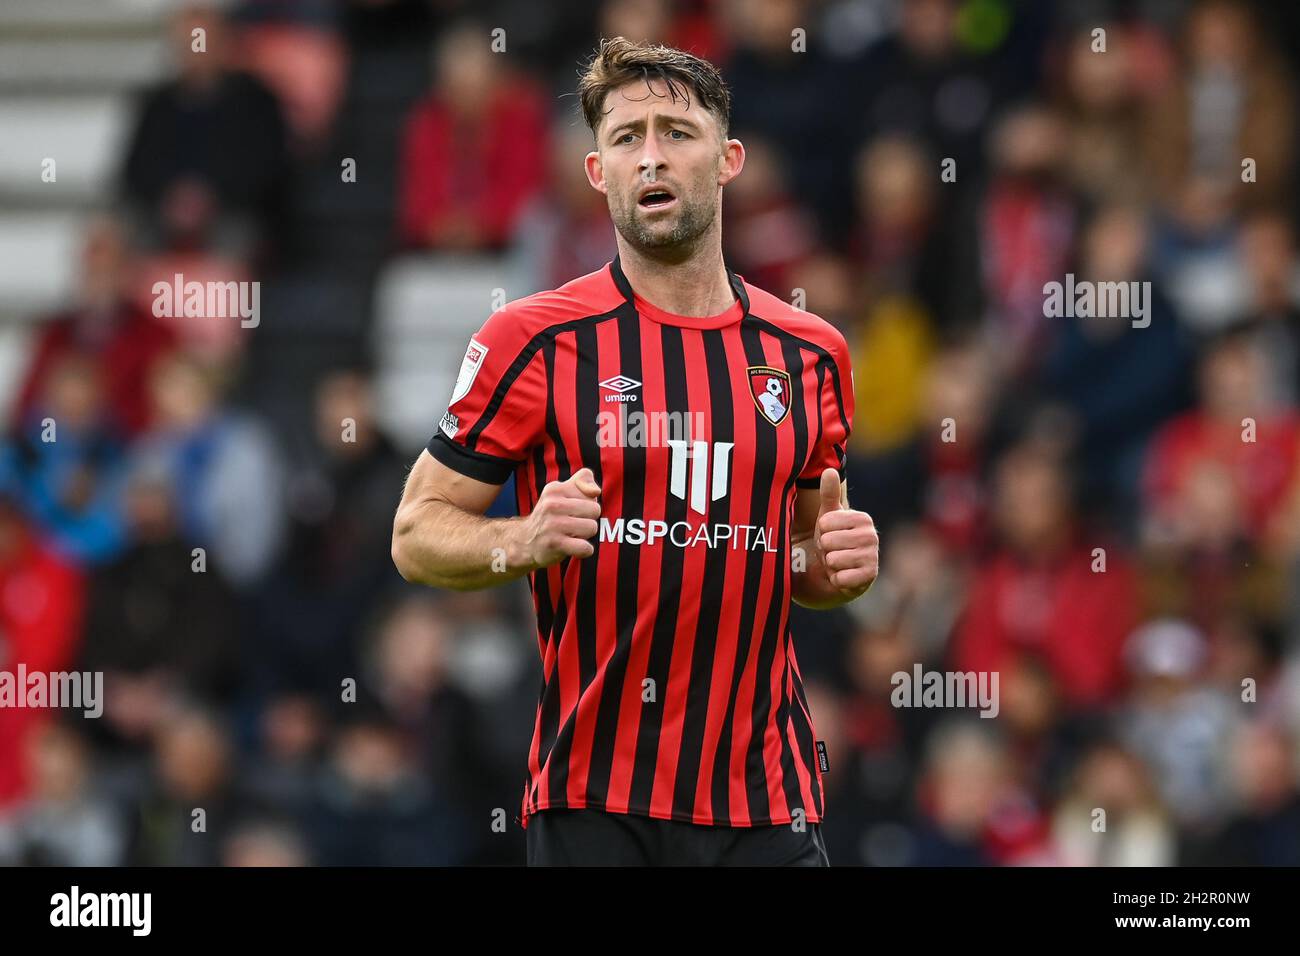 Gary Cahill #24 of Bournemouth during the game Stock Photo